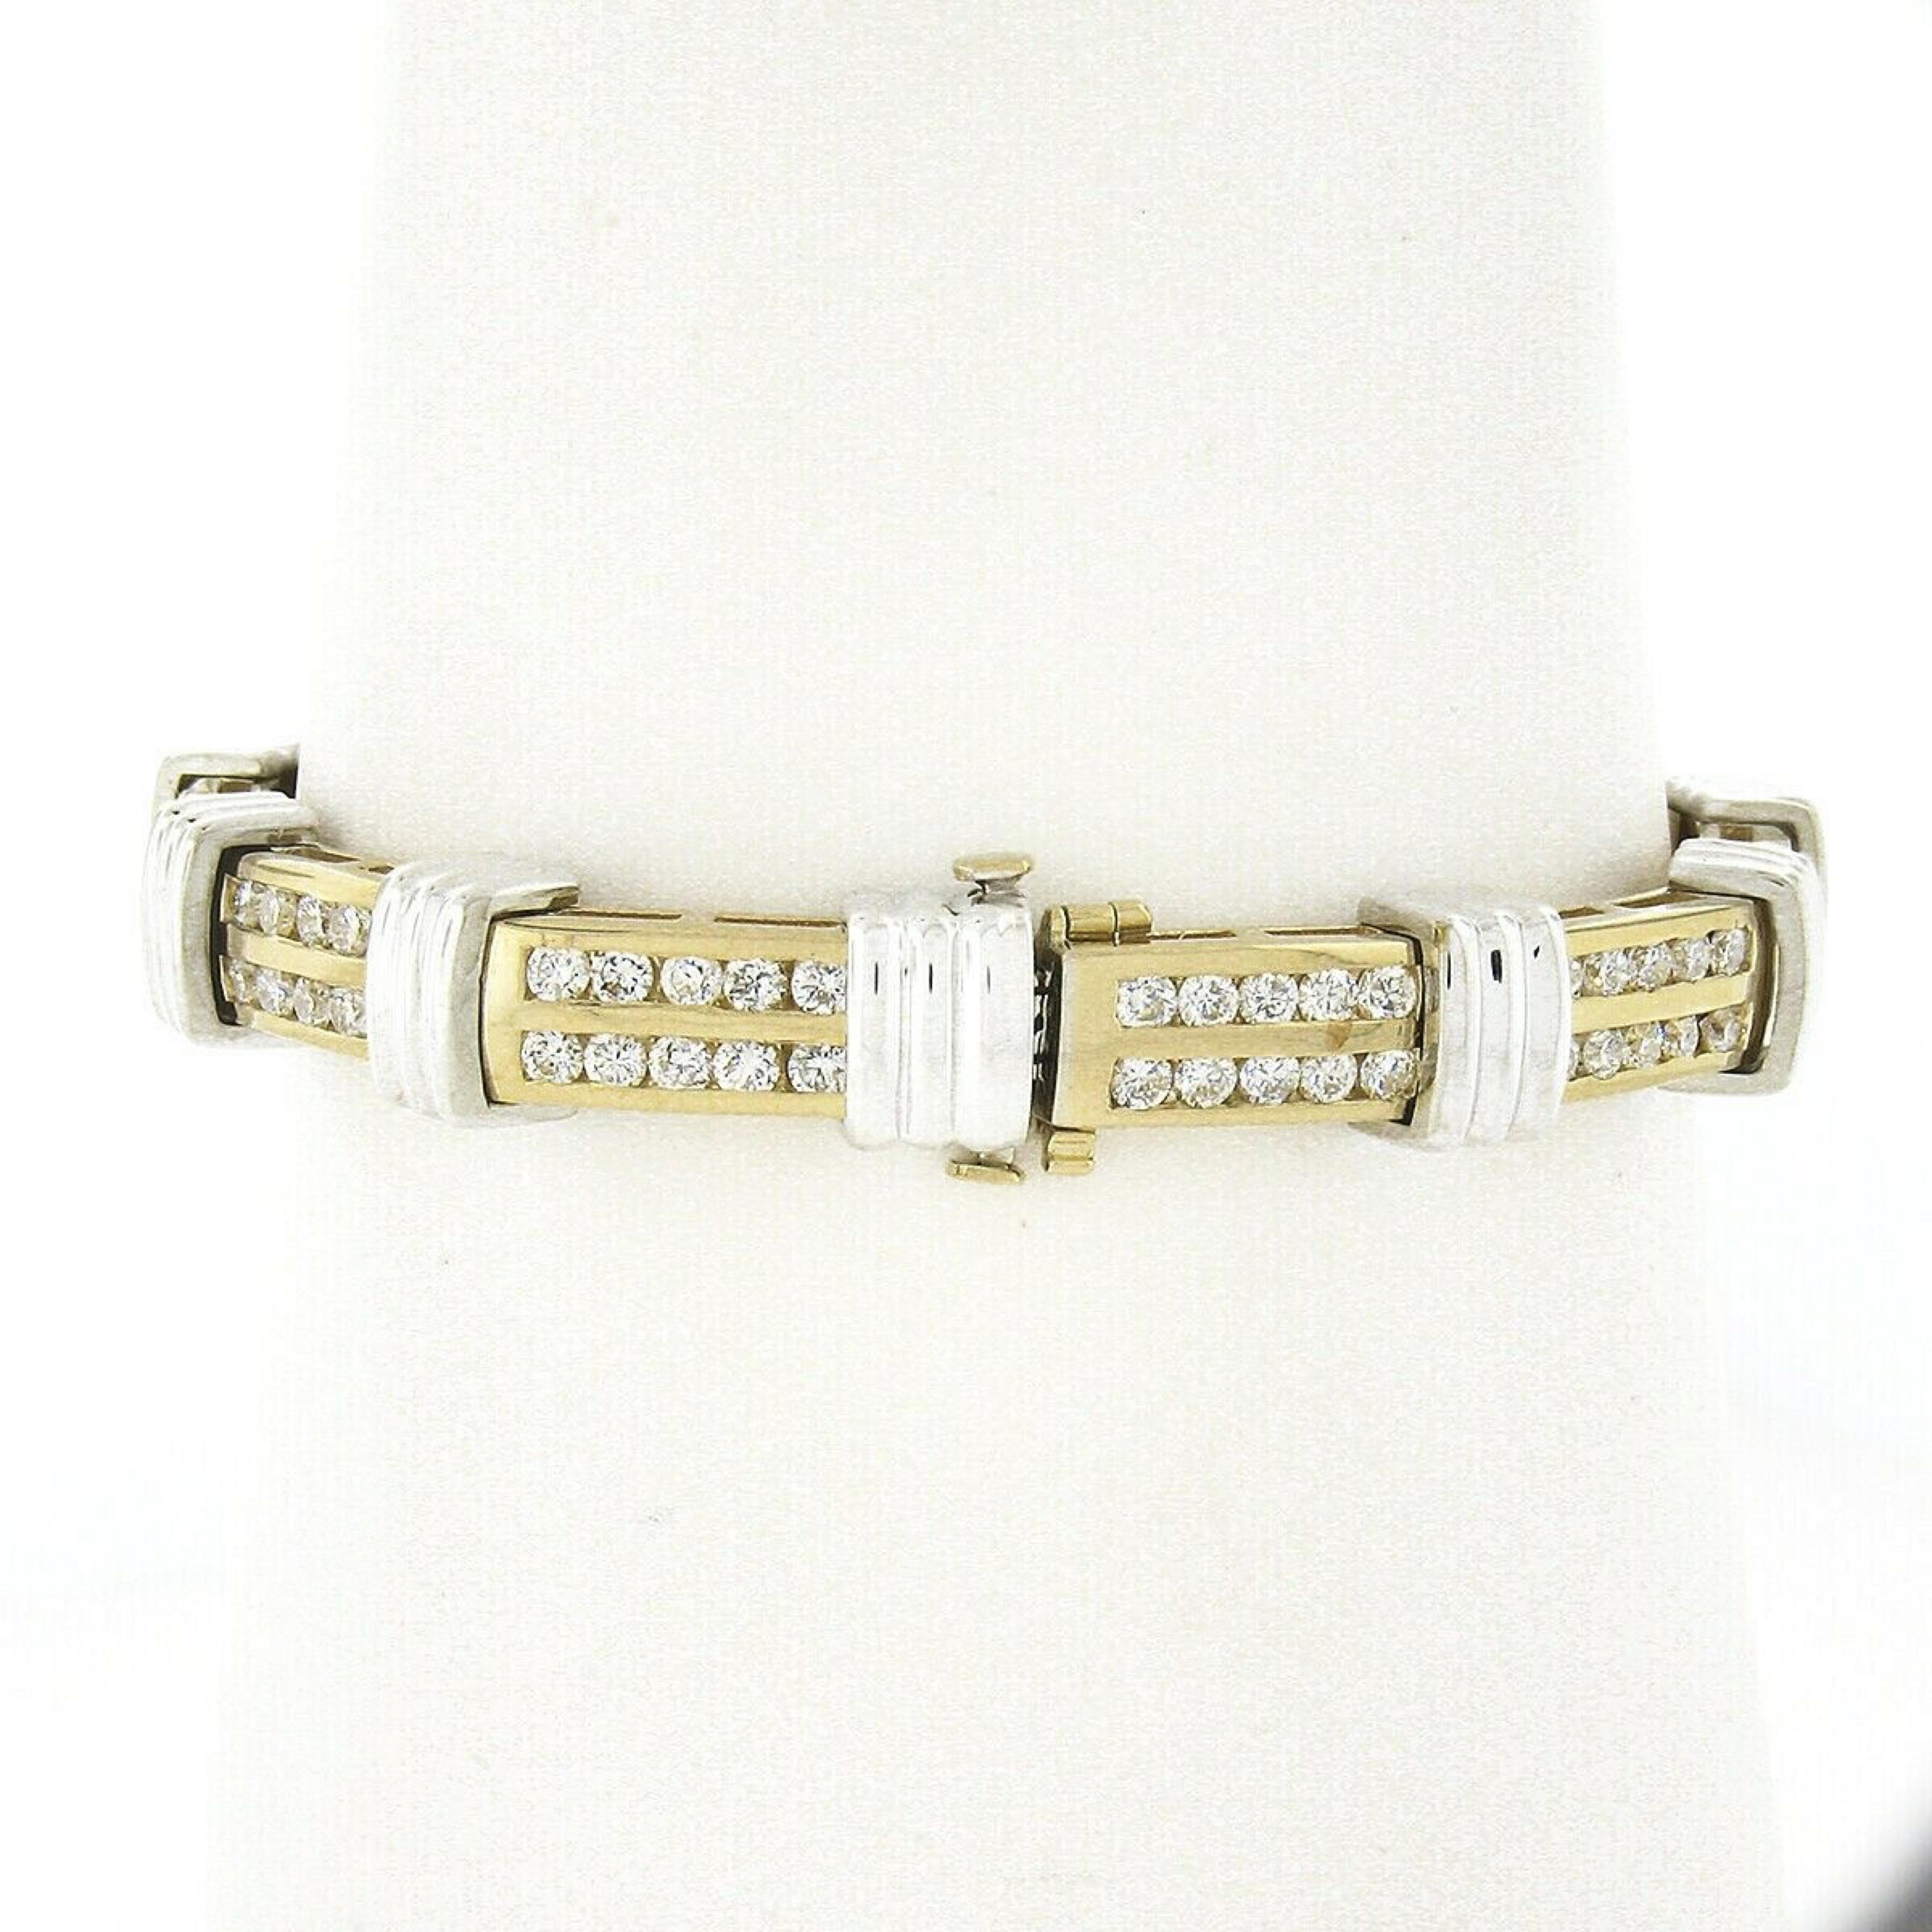 This truly magnificent diamond tennis bracelet is well crafted in solid 14k yellow and white gold. The design alternates with dual diamond channels and plain white gold grooved links that stand out with high polished finish throughout. The diamonds